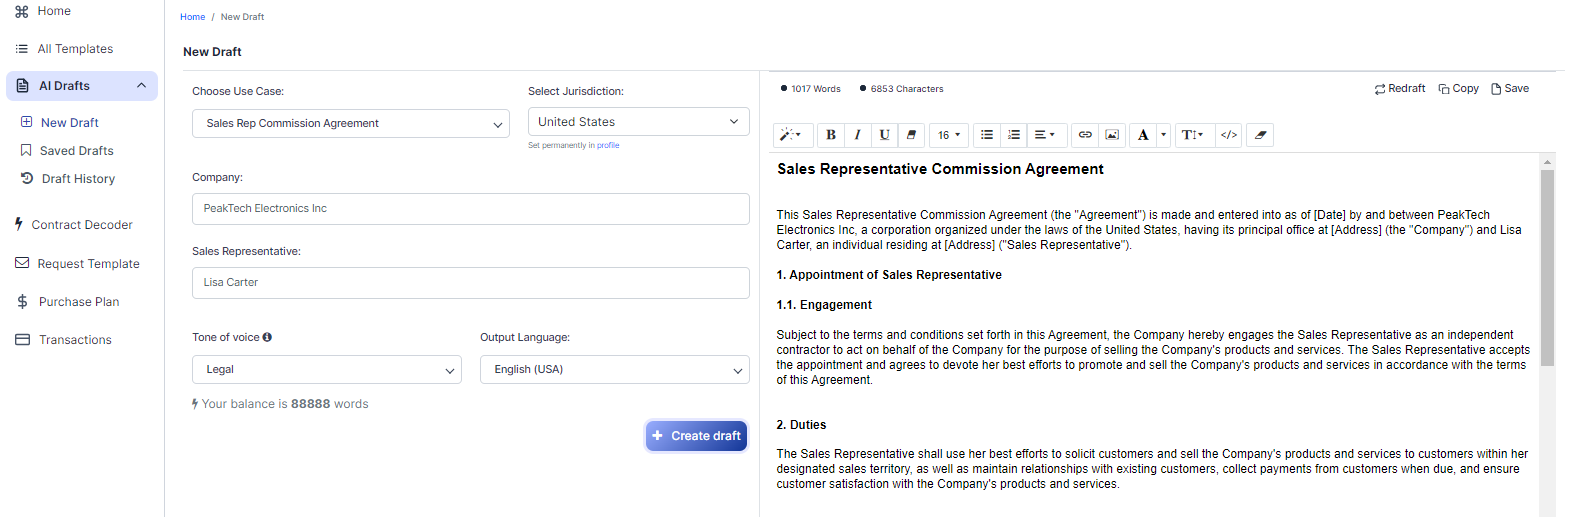 Sales Rep Commission Agreement template